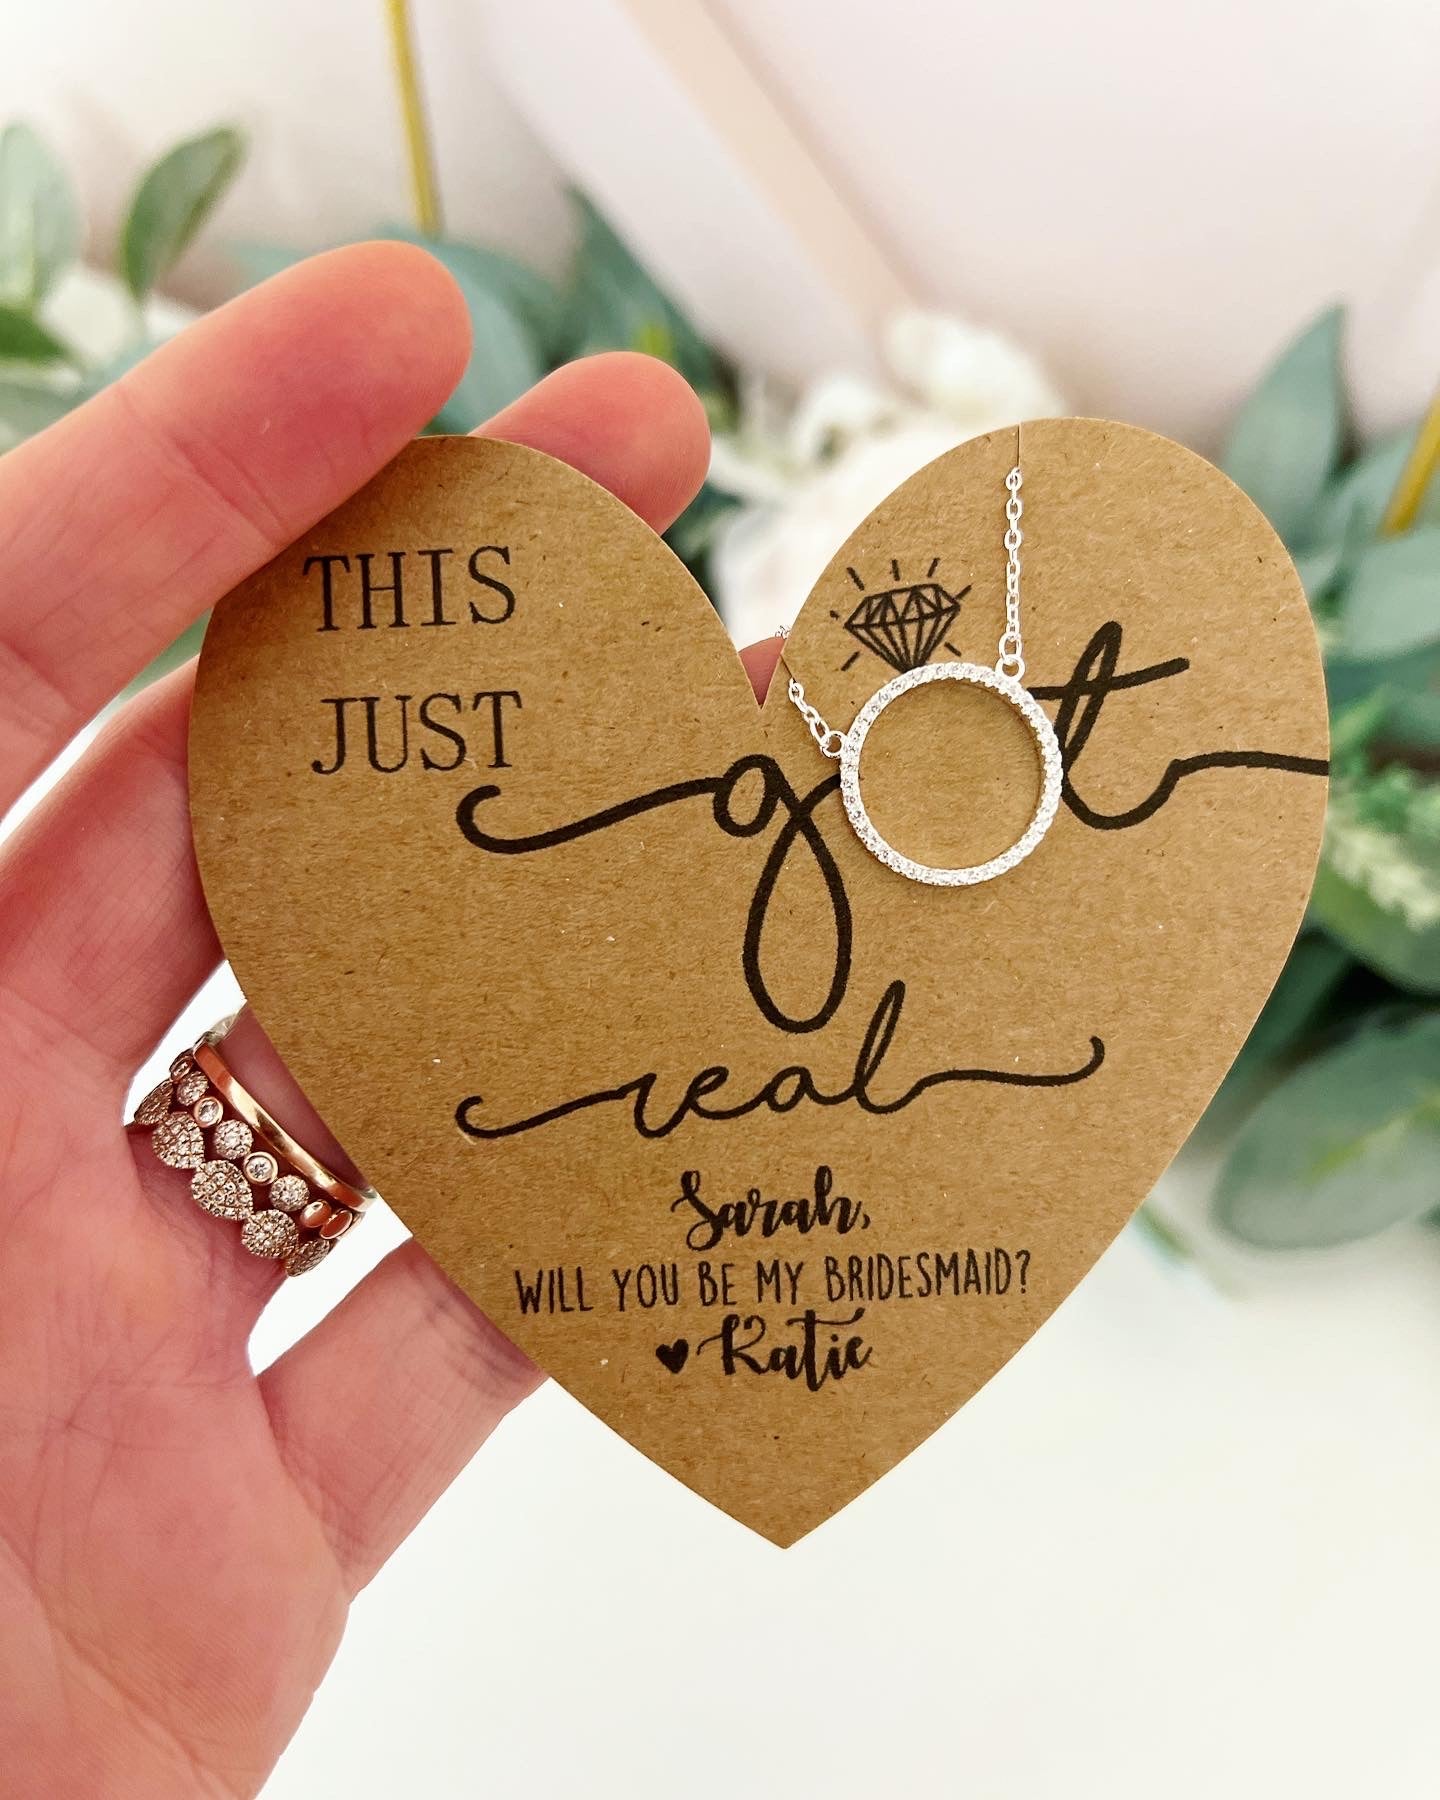 This Just Got Real! Bridesmaid Circle Pendant Necklace